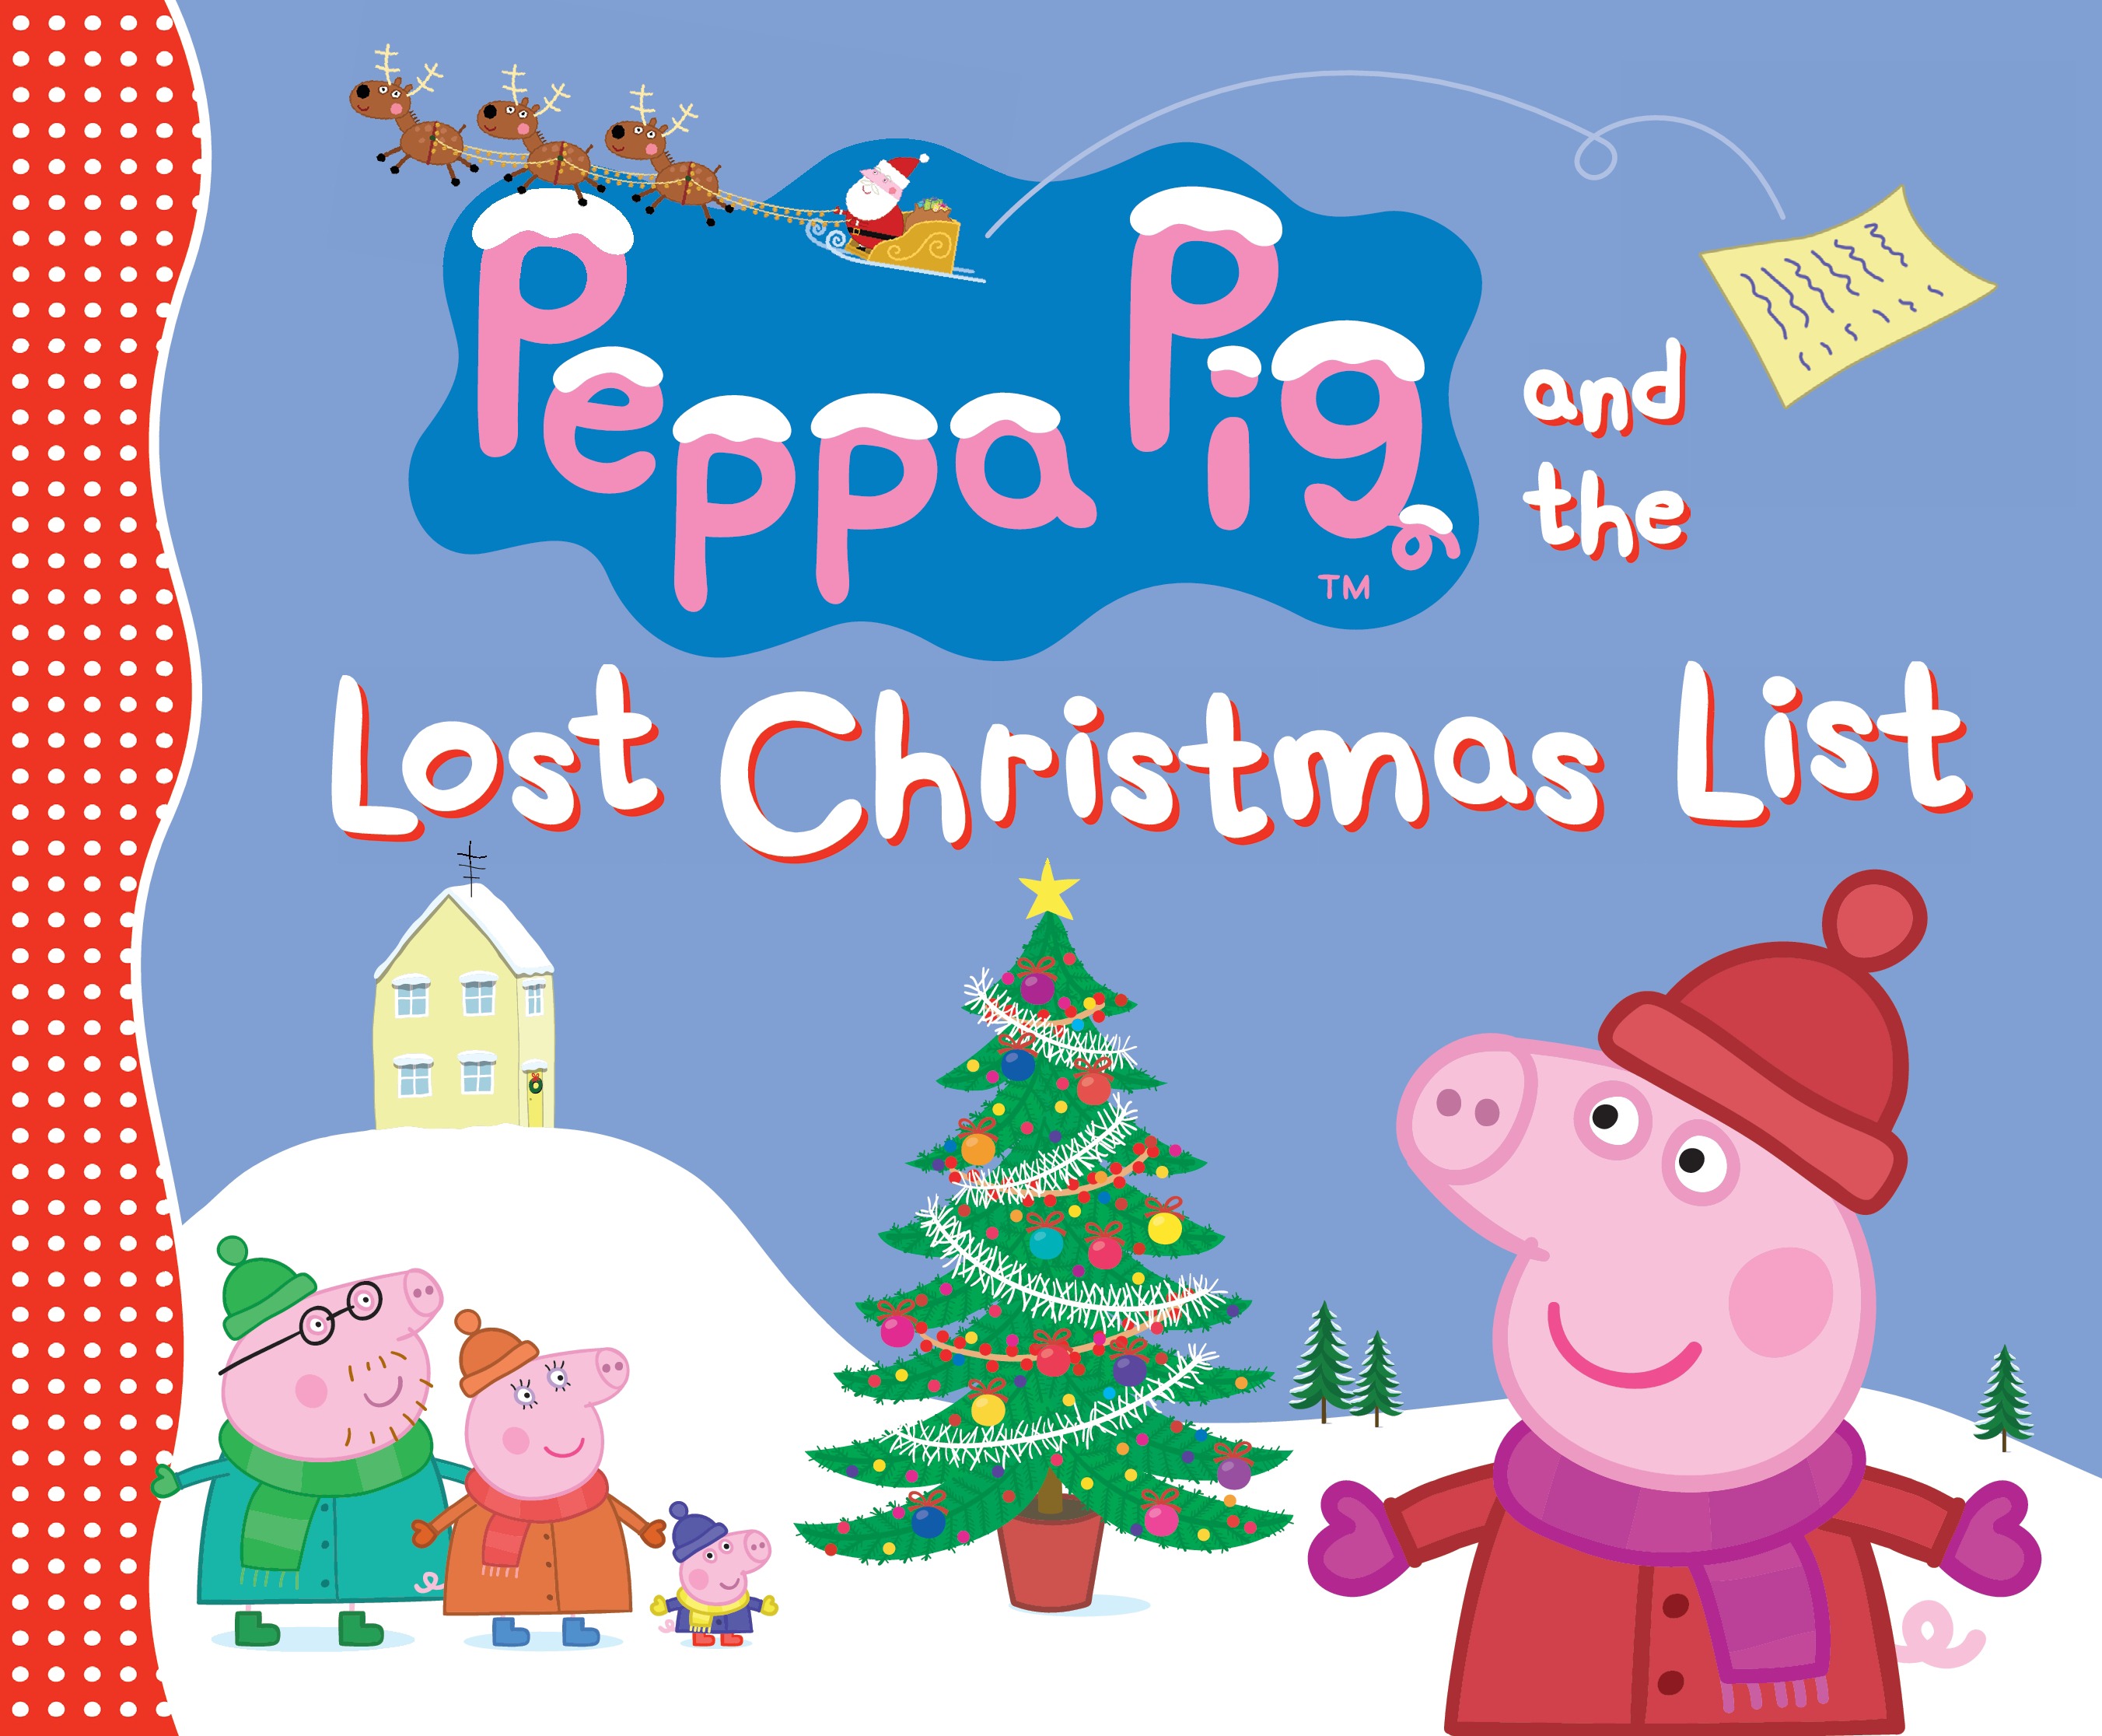 Peppa Pig and the Lost Christmas List - image 1 of 1